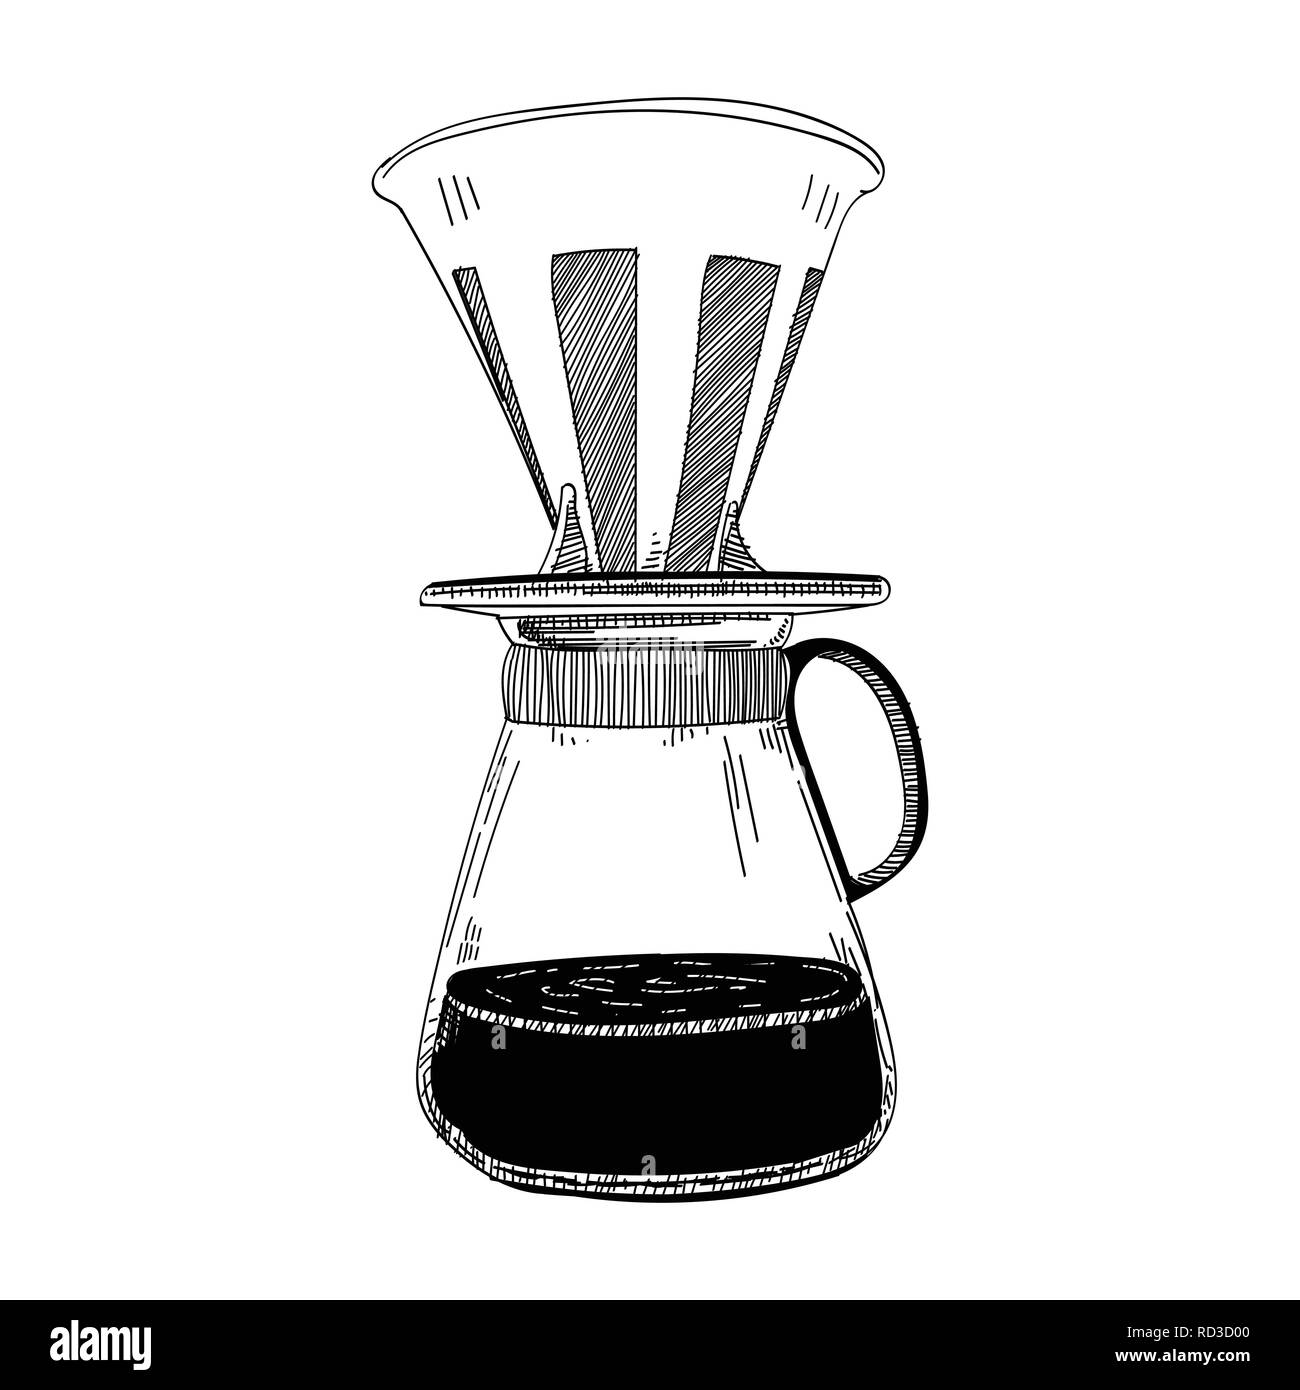 https://c8.alamy.com/comp/RD3D00/hand-drip-coffee-simple-line-vector-isolate-on-white-background-vector-iconic-design-RD3D00.jpg